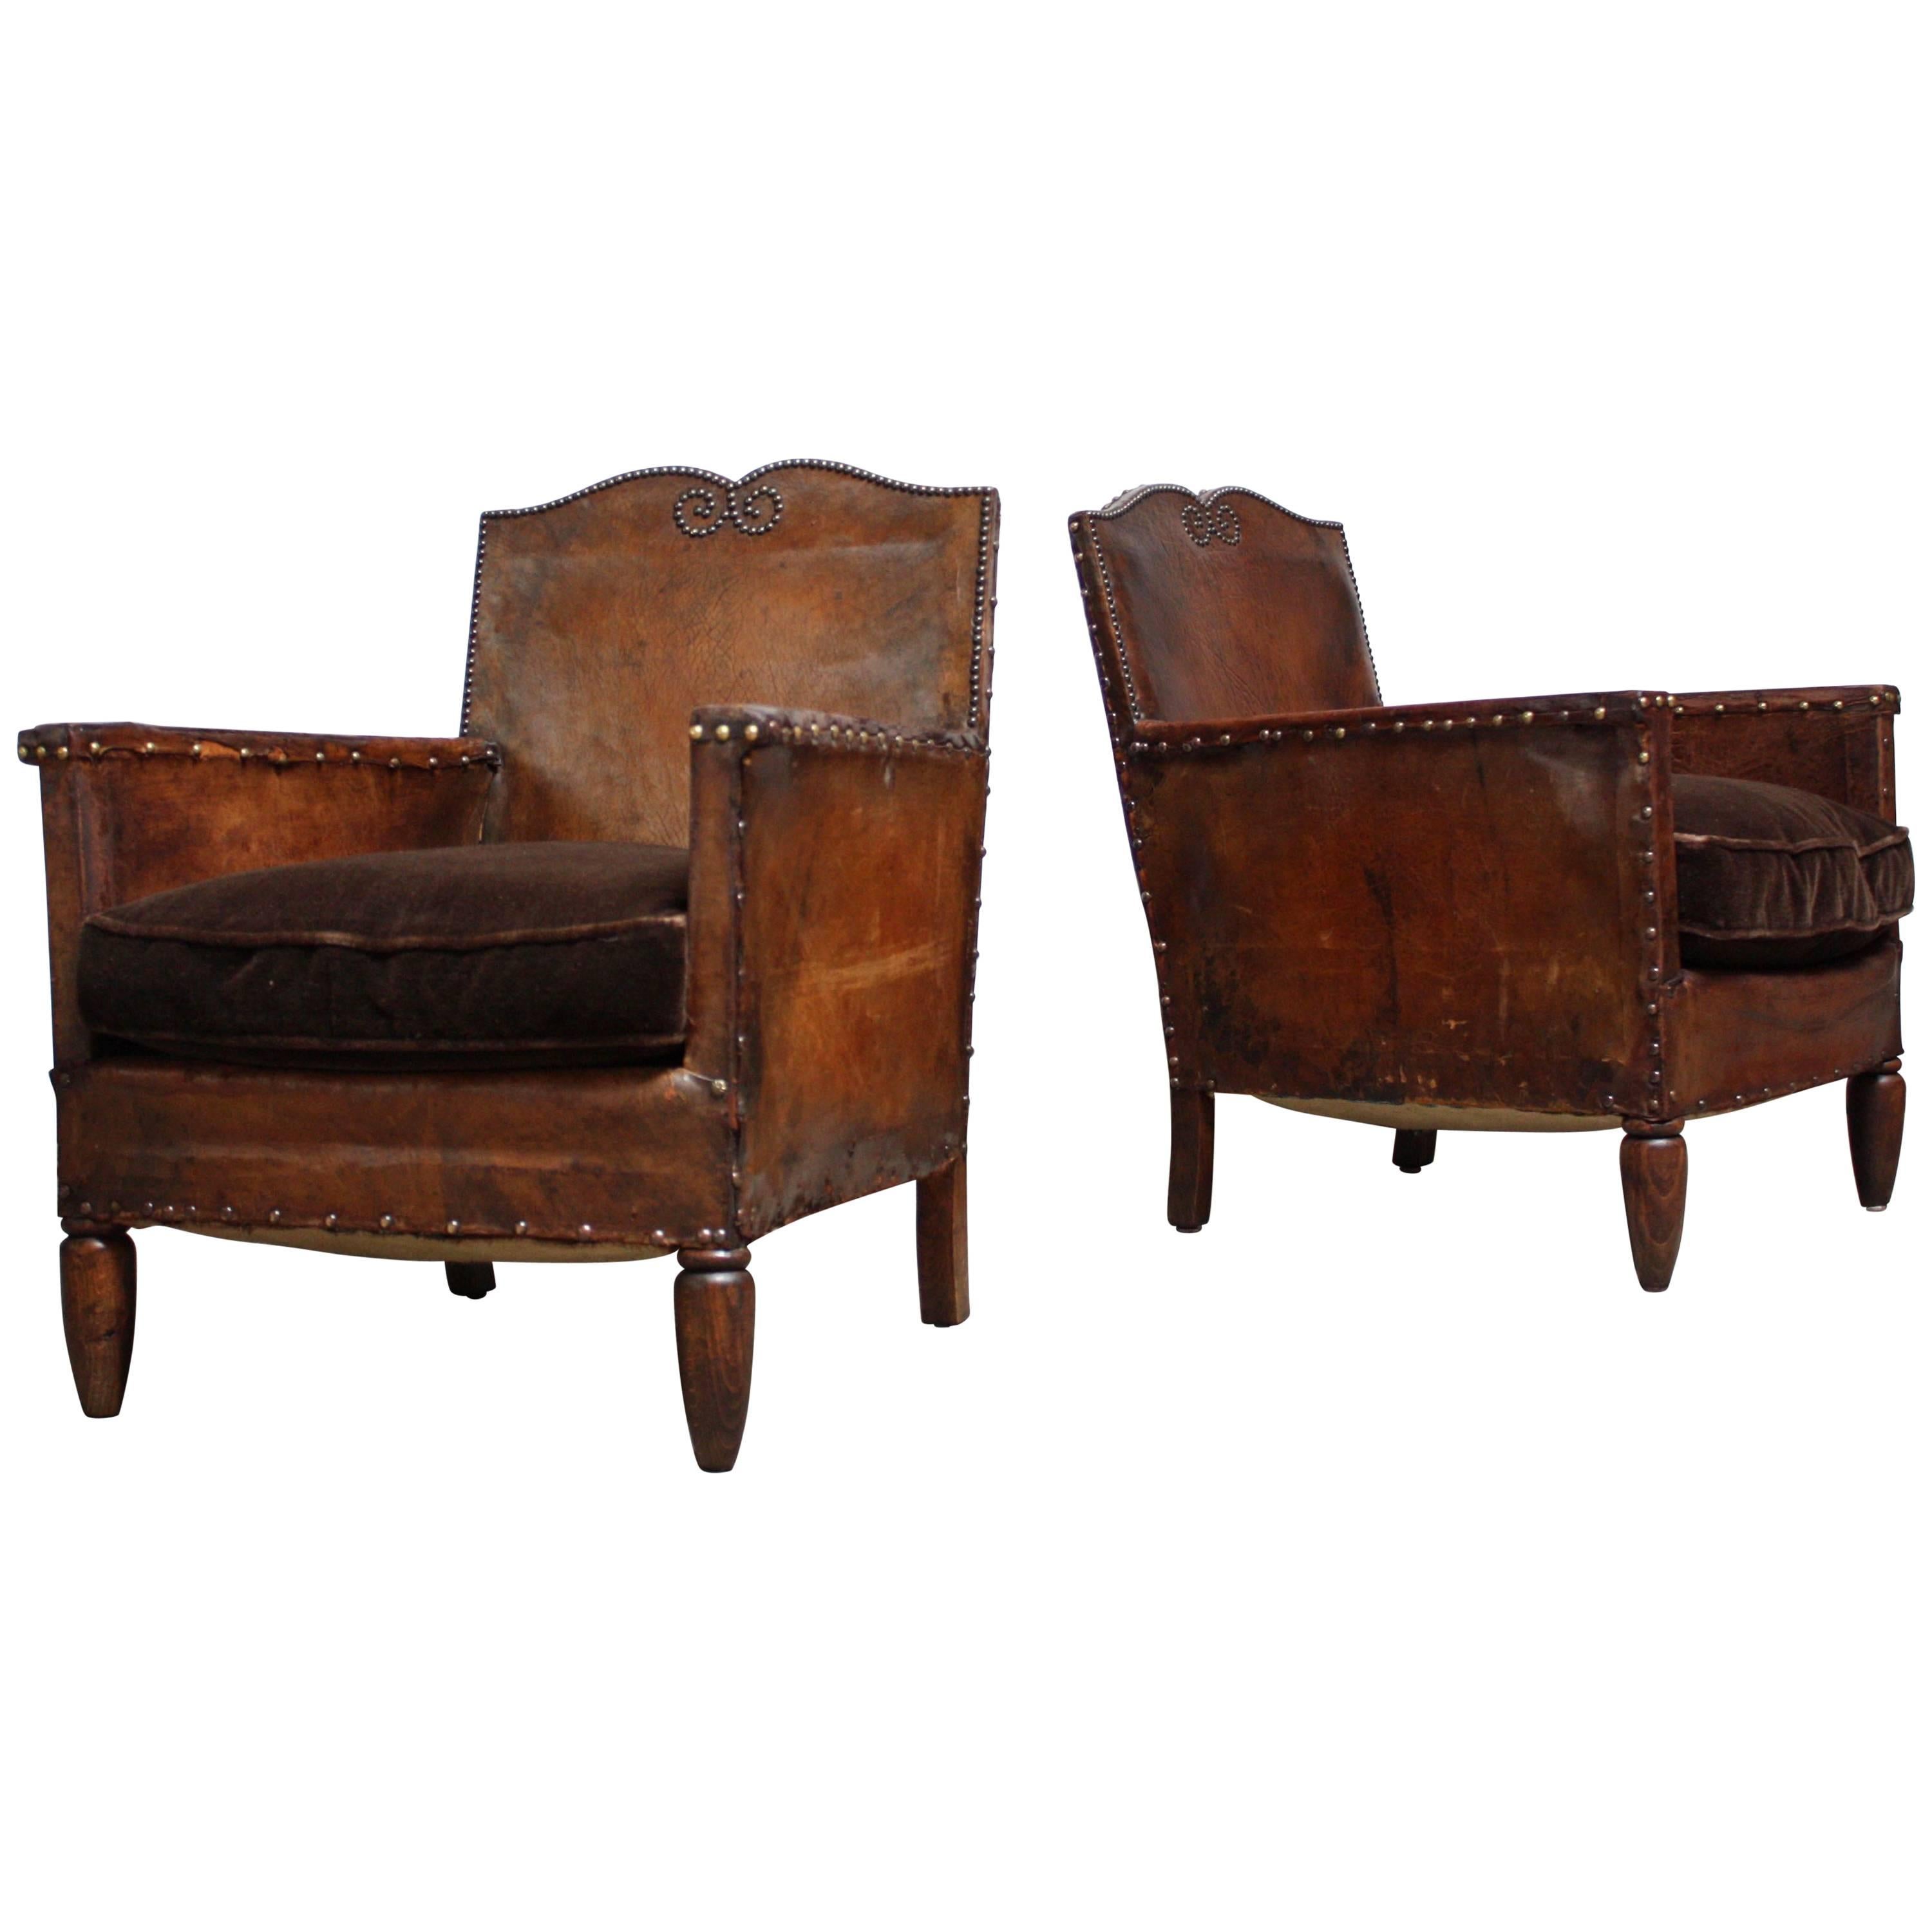 Pair of Diminutive French Leather Club Chairs